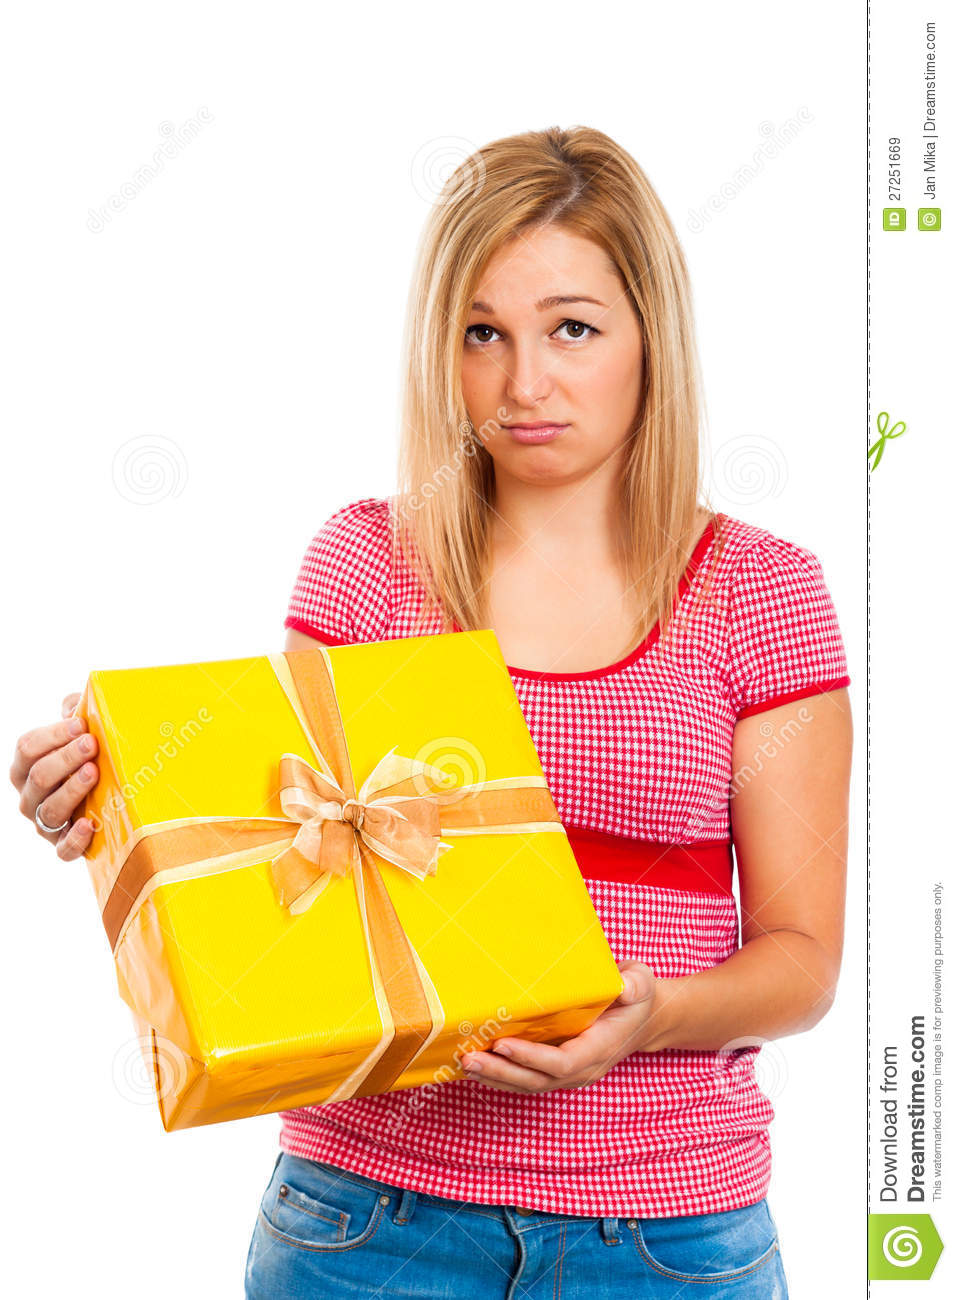 Disappointed Woman With Gift Royalty Free Stock Images   Image